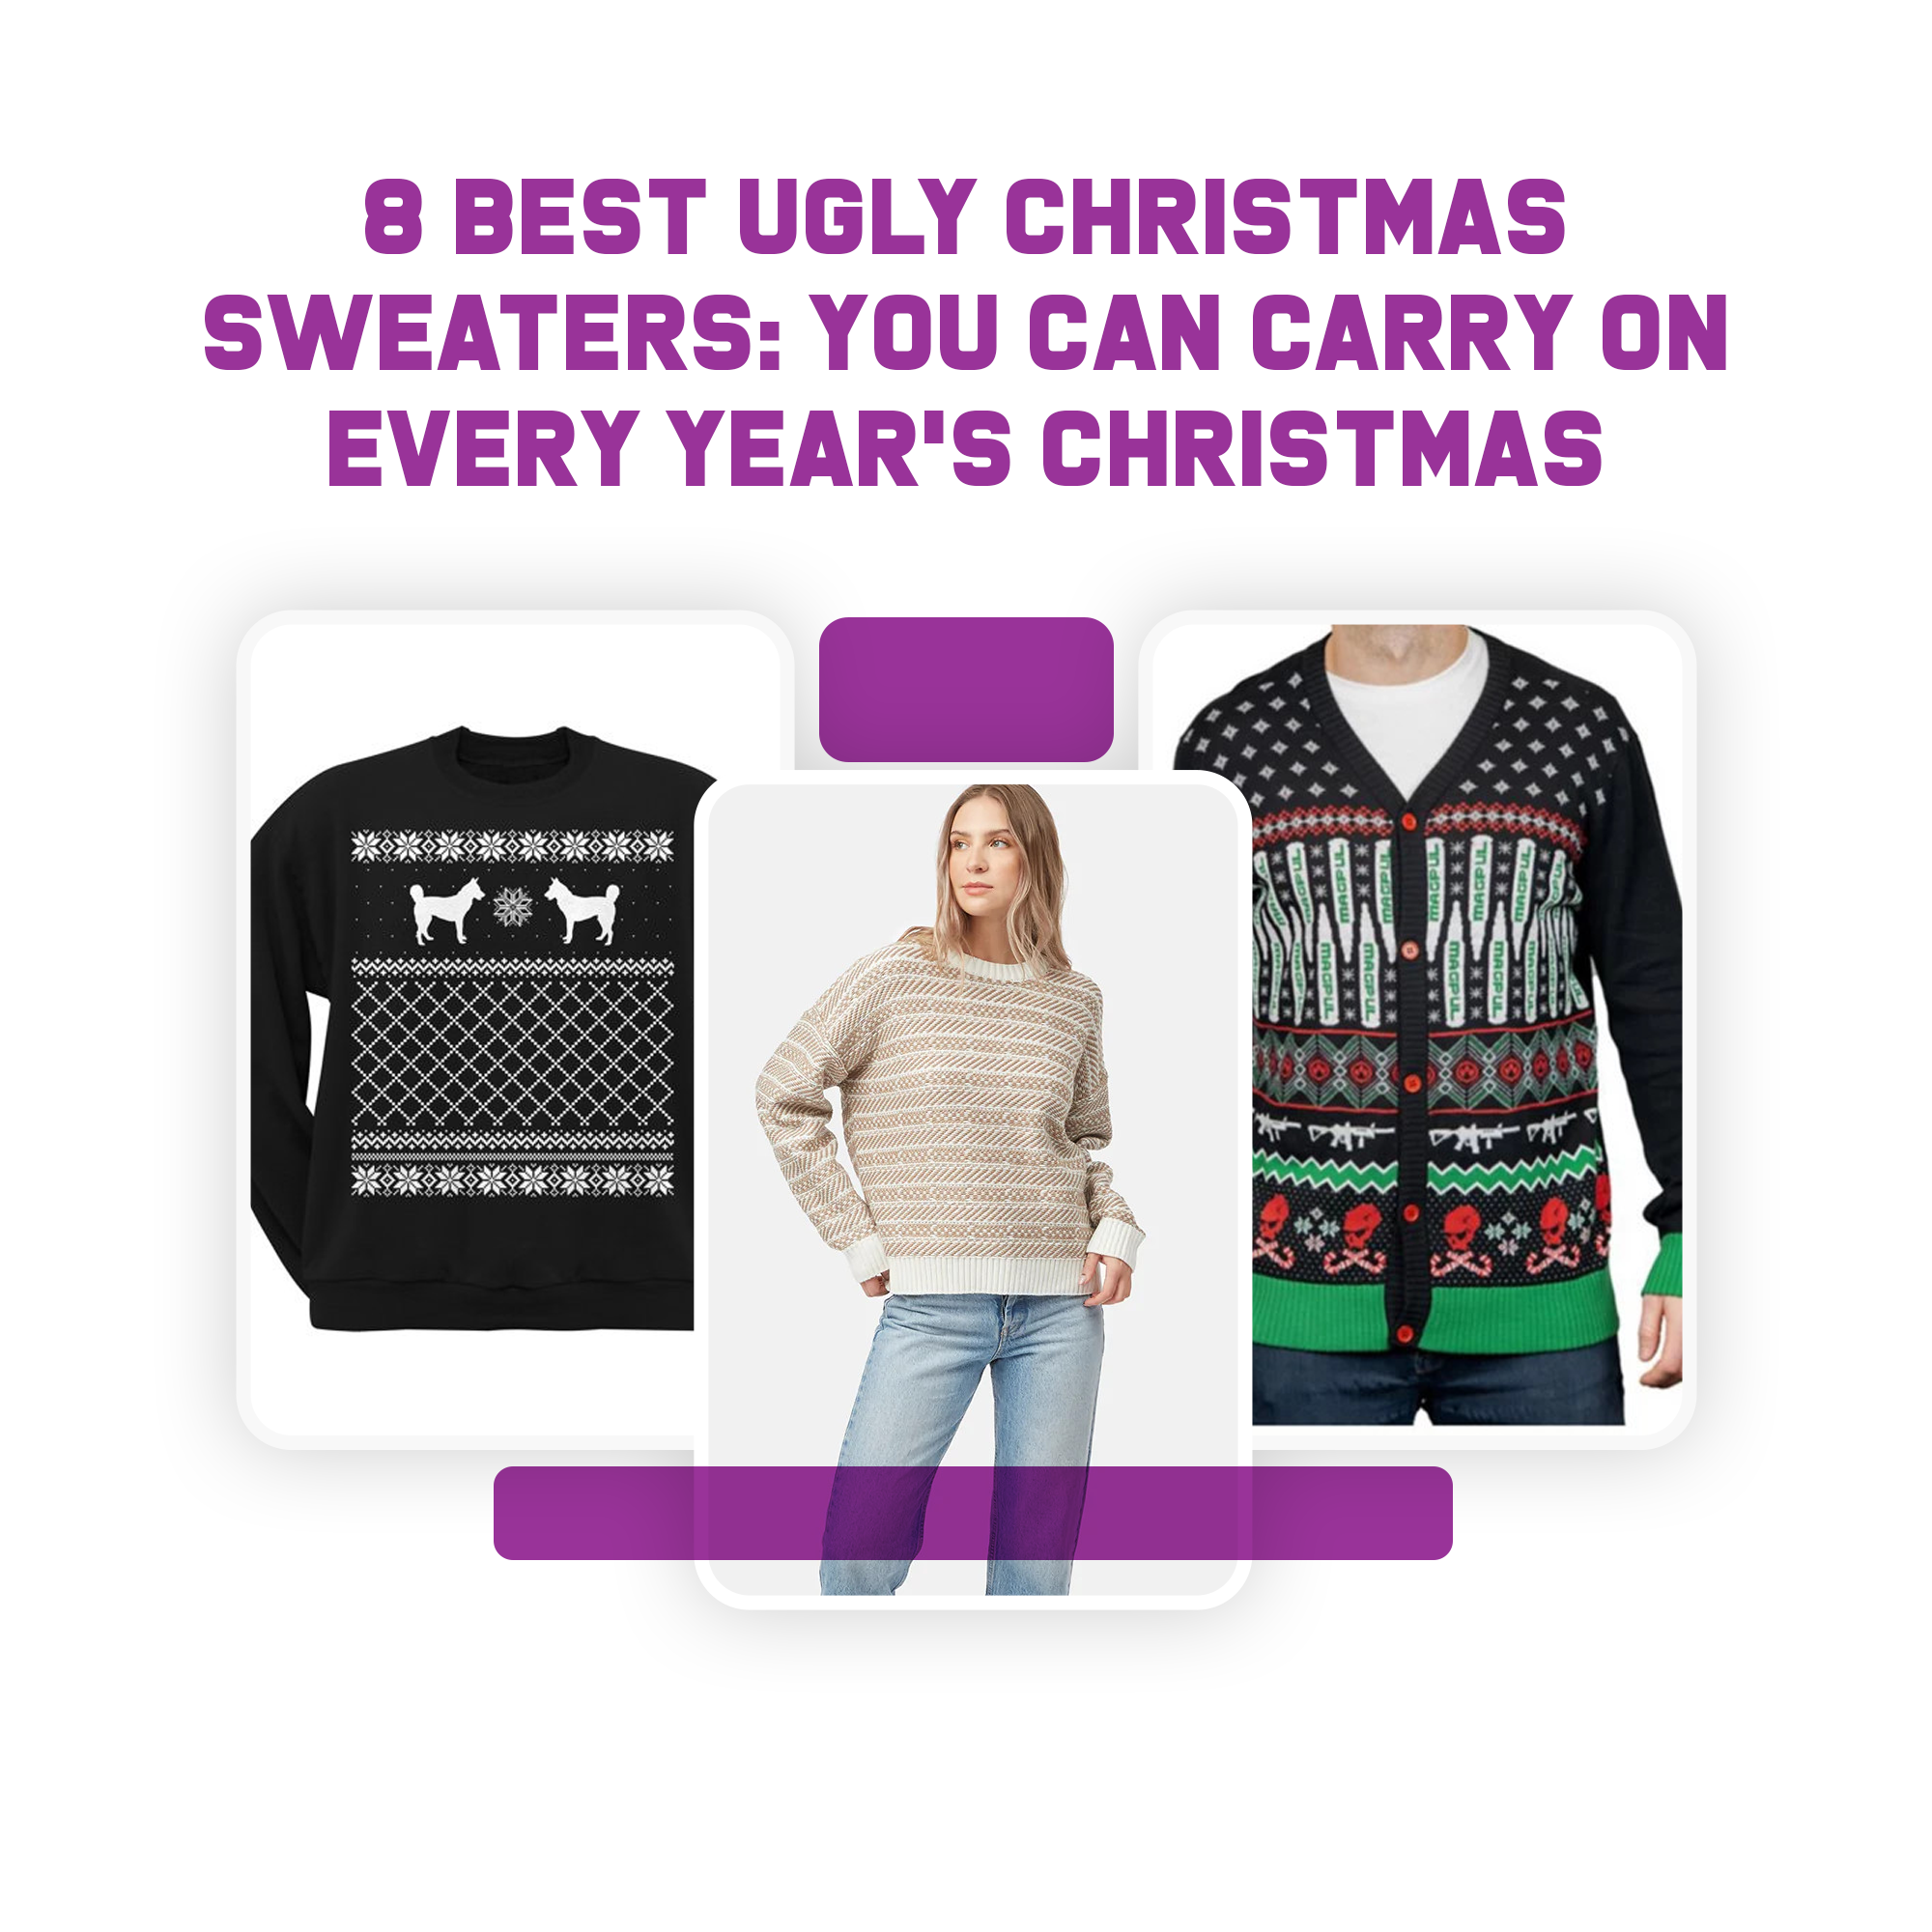 8 Best Ugly Christmas Sweaters: You Can Carry On Every Year’s Christmas